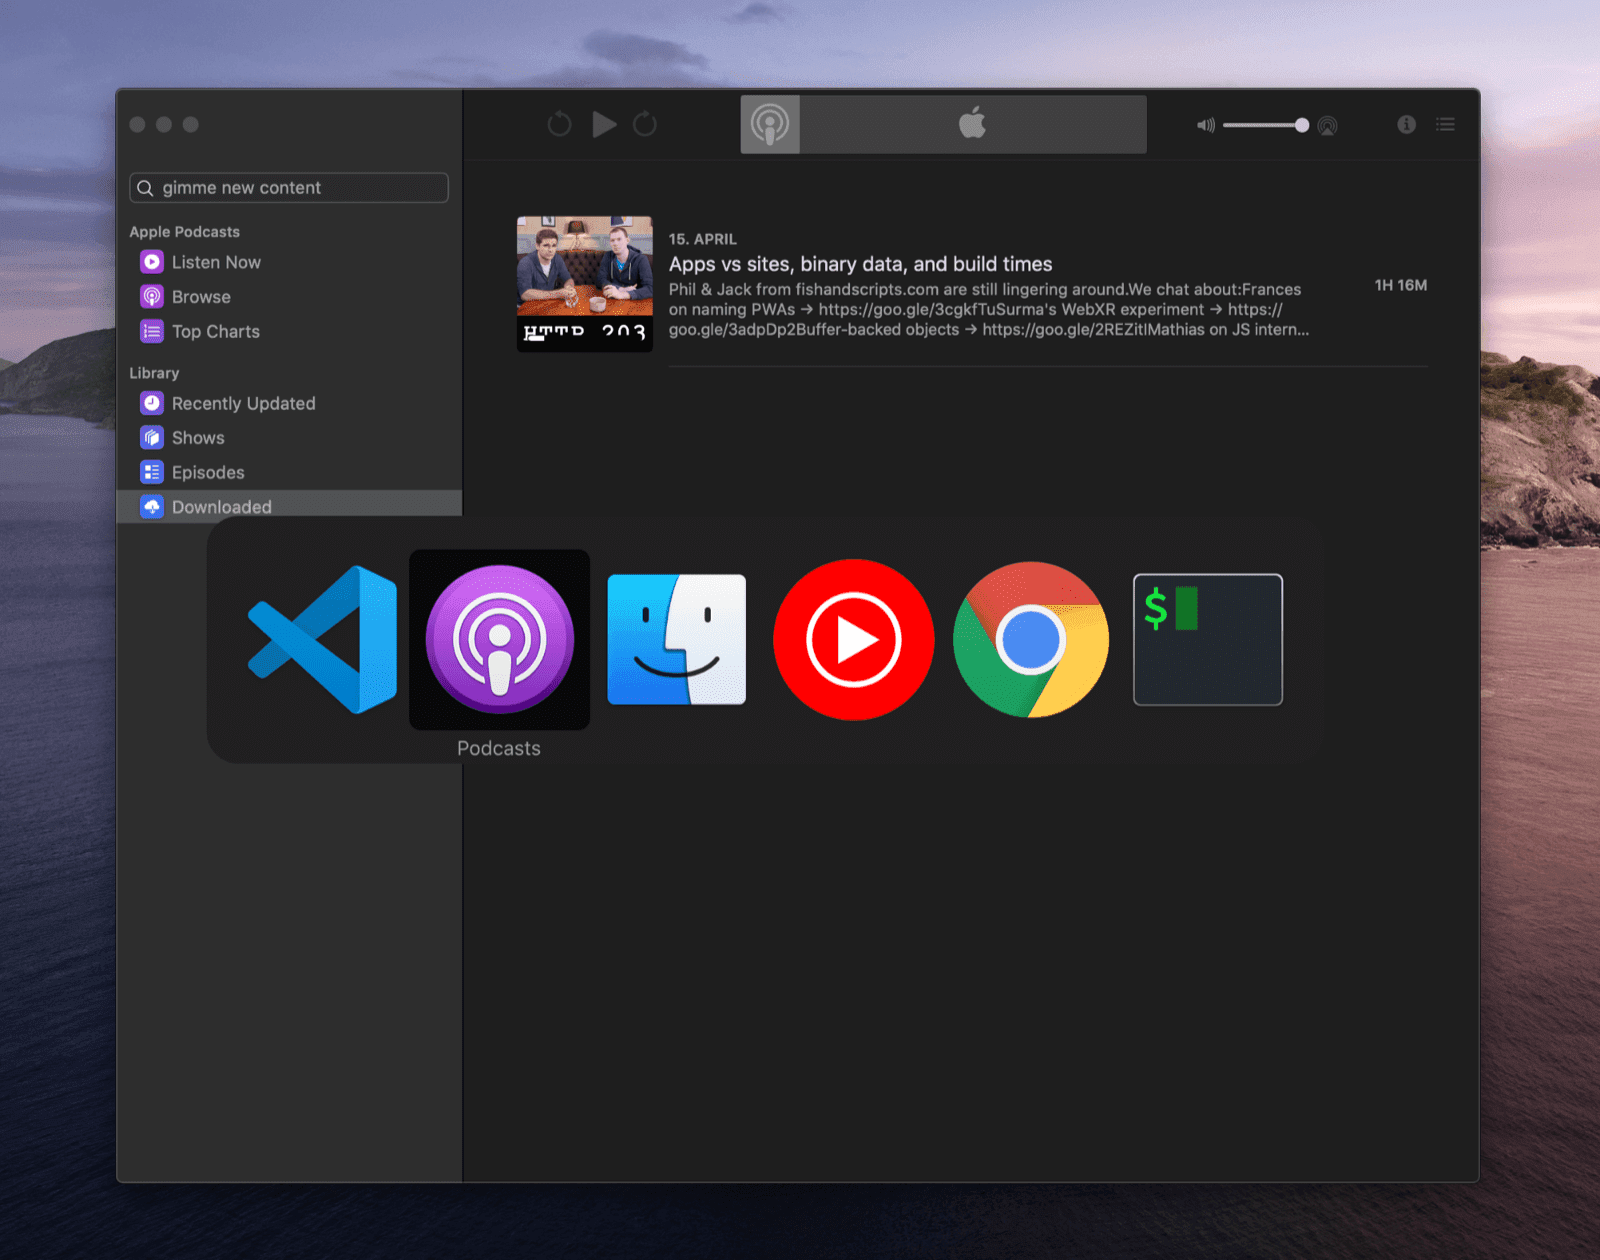 The macOS task switcher with a number of app icons to choose from, one of them the Podcasts app.